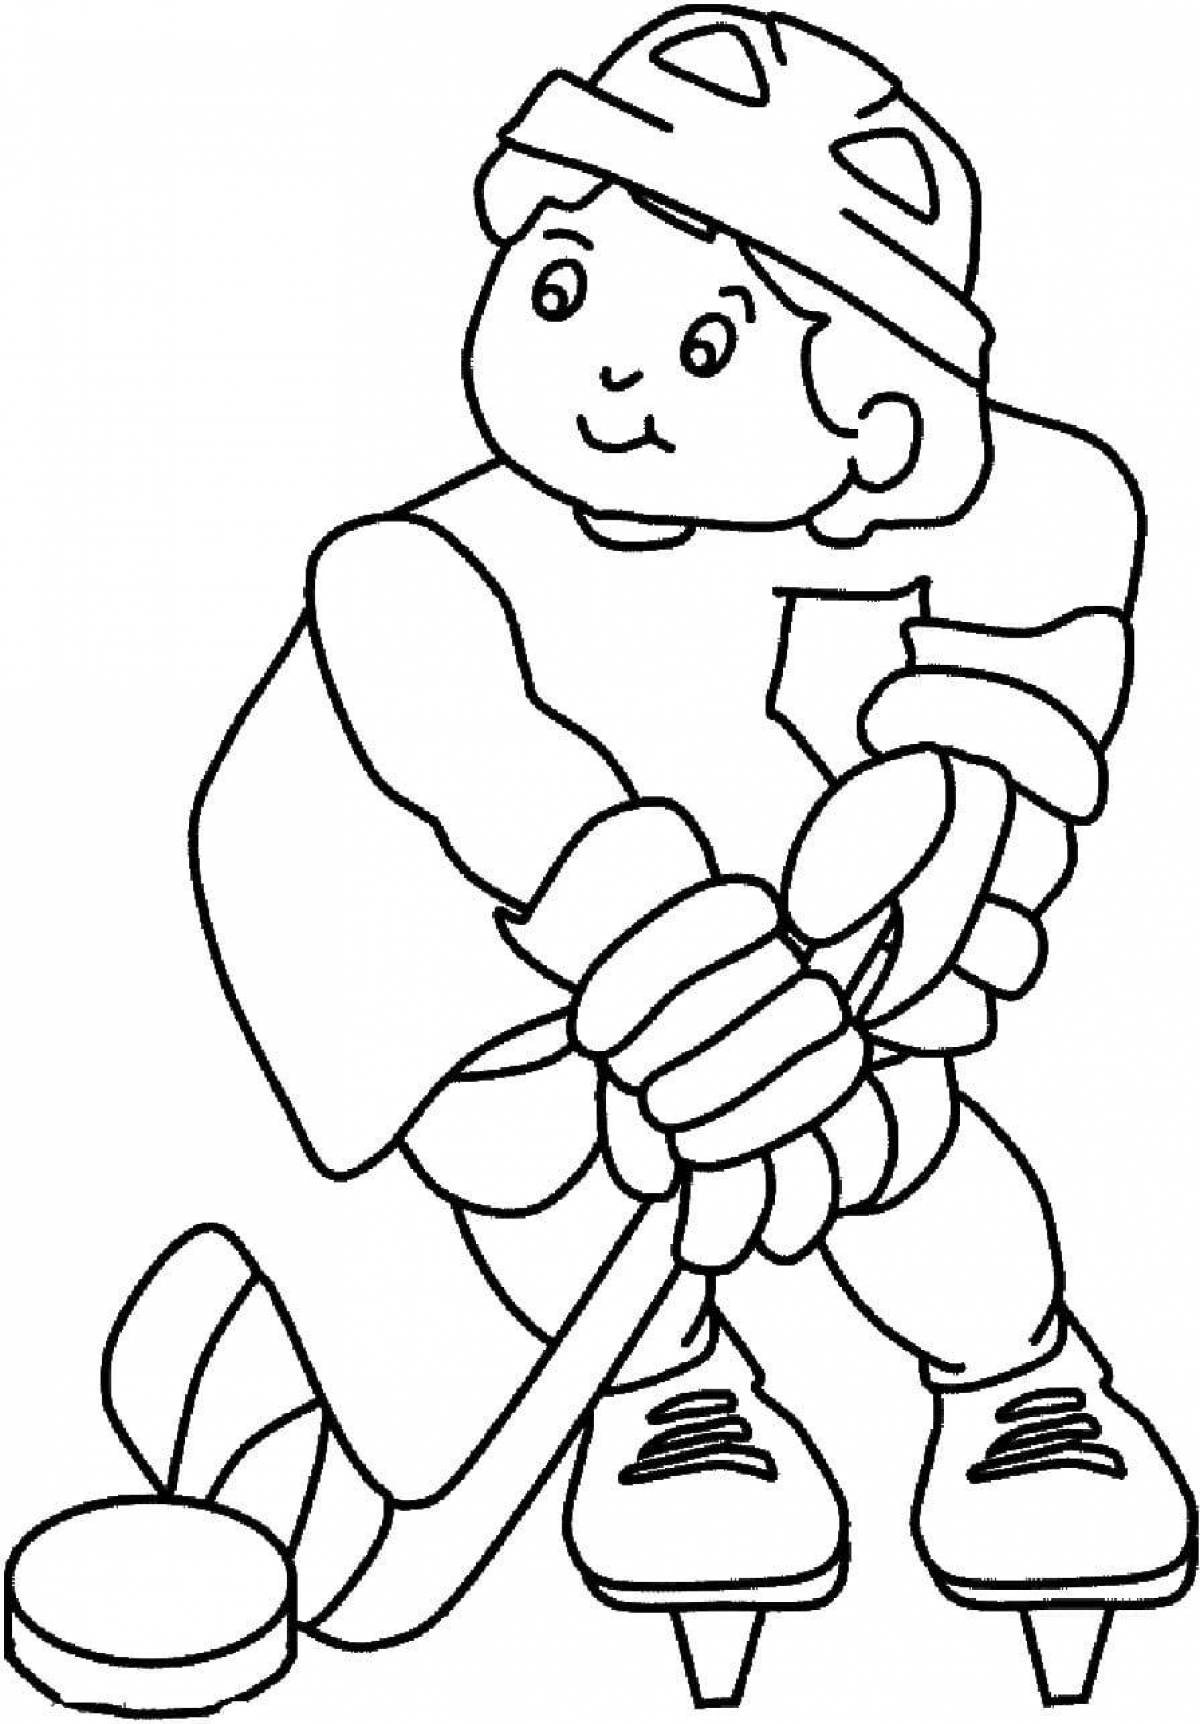 Adorable hockey player coloring page for kids